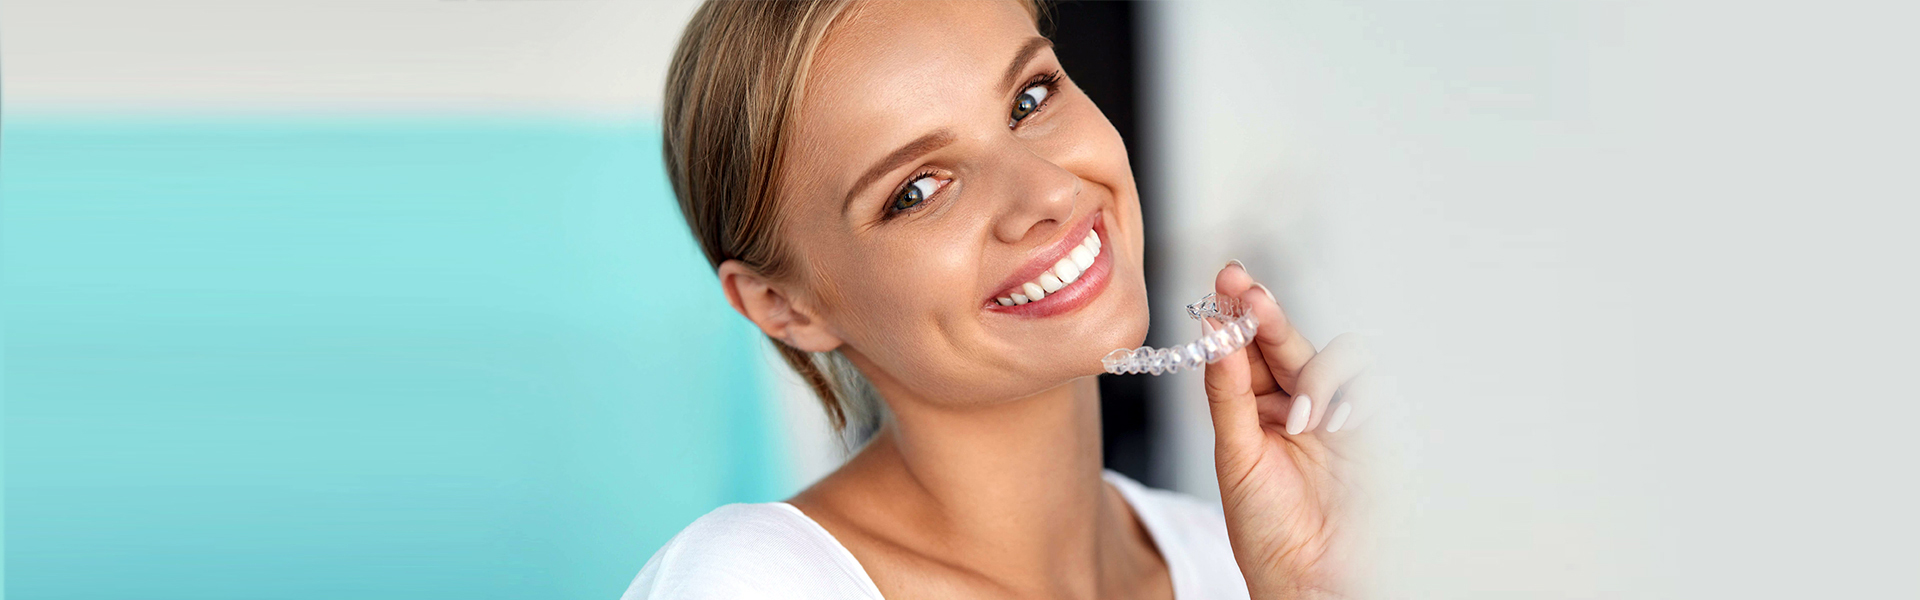 Everything You Need to Know About Invisalign Braces